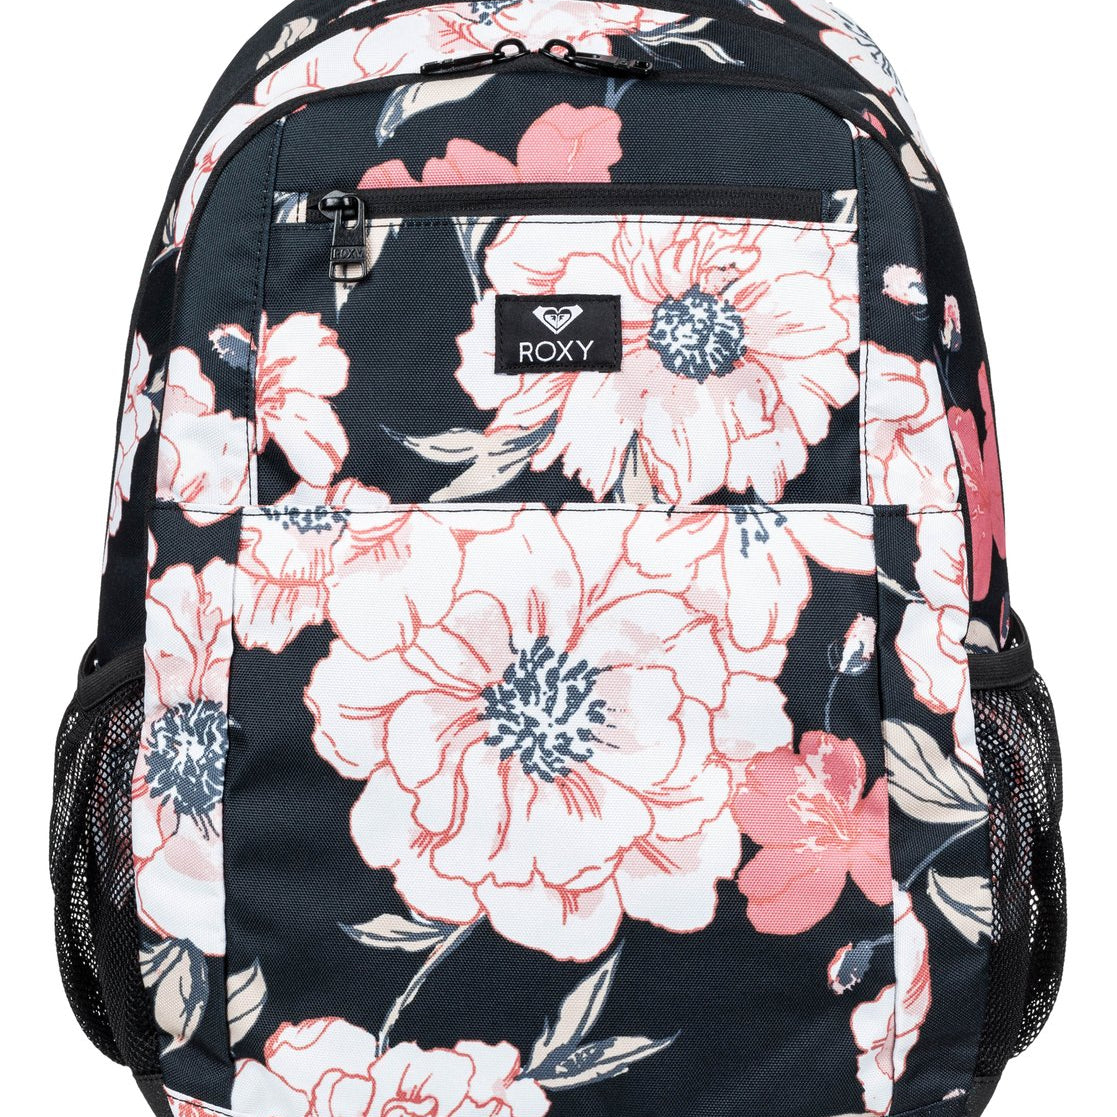 Roxy Here You Are Backpack KVJ7 OS